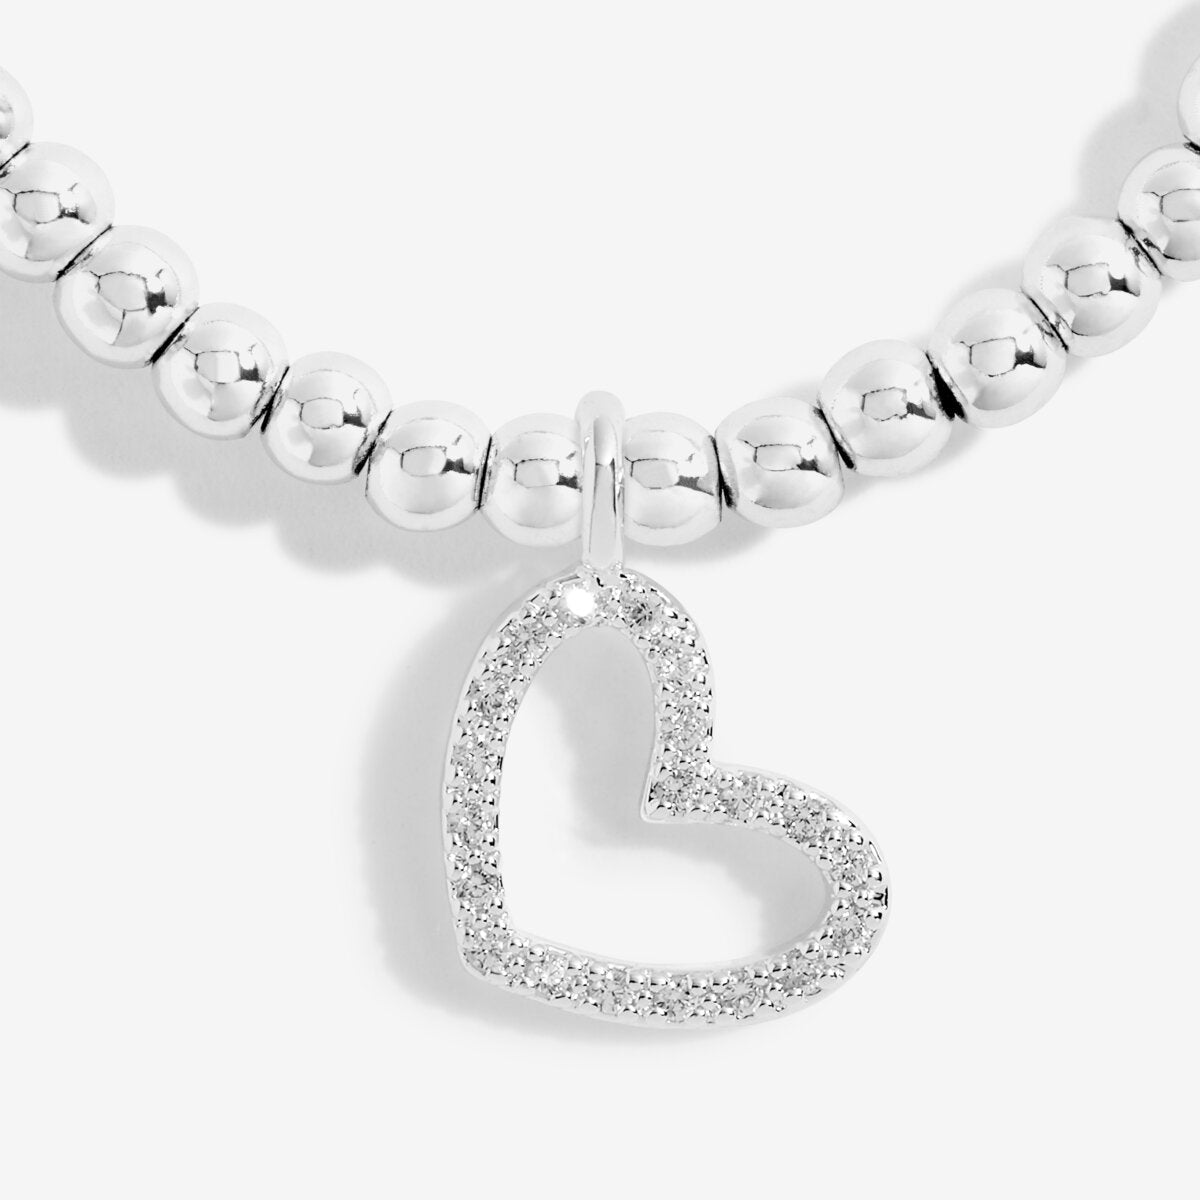 Joma Jewellery sweet sixteen silver bracelet birthday gift clasp of pave crystal open heart charm